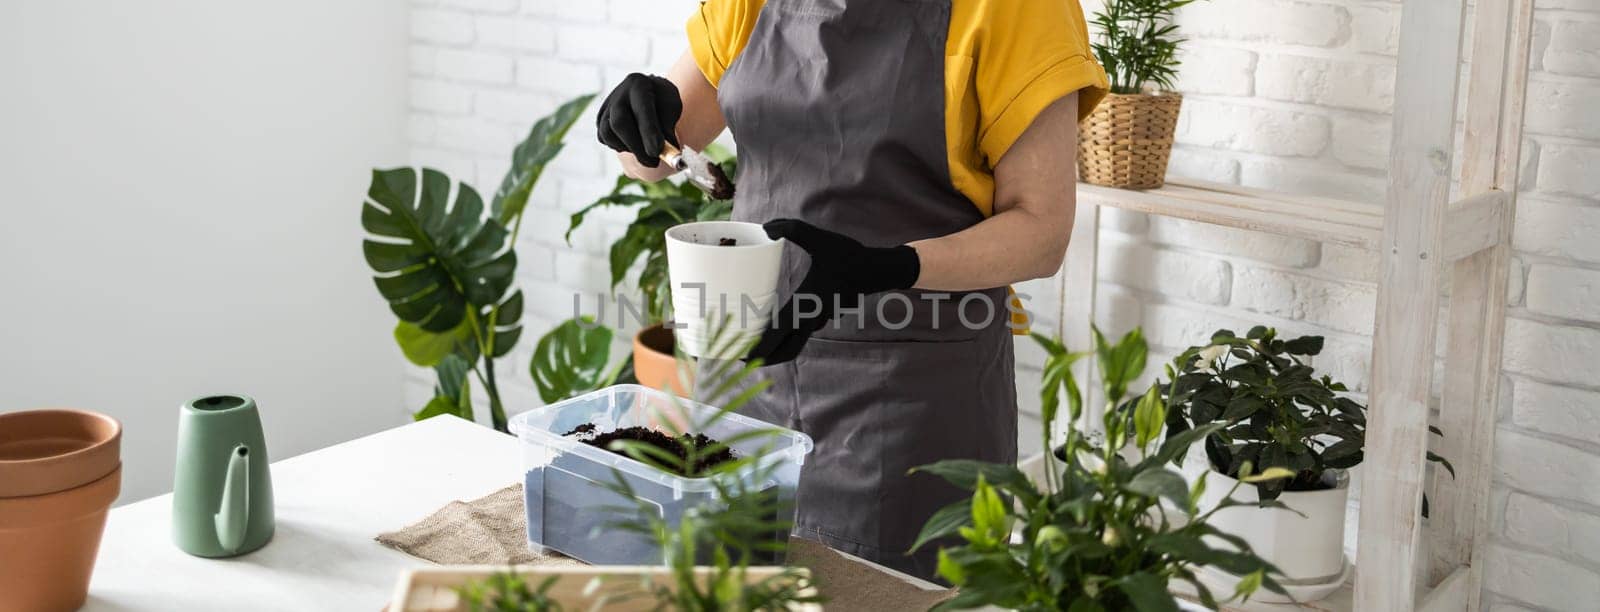 Spring houseplant care banner, repotting houseplants. Waking up indoor plants for spring. Middle aged woman is transplanting plant into new pot at home. Gardener transplant plant Spathiphyllum by Satura86